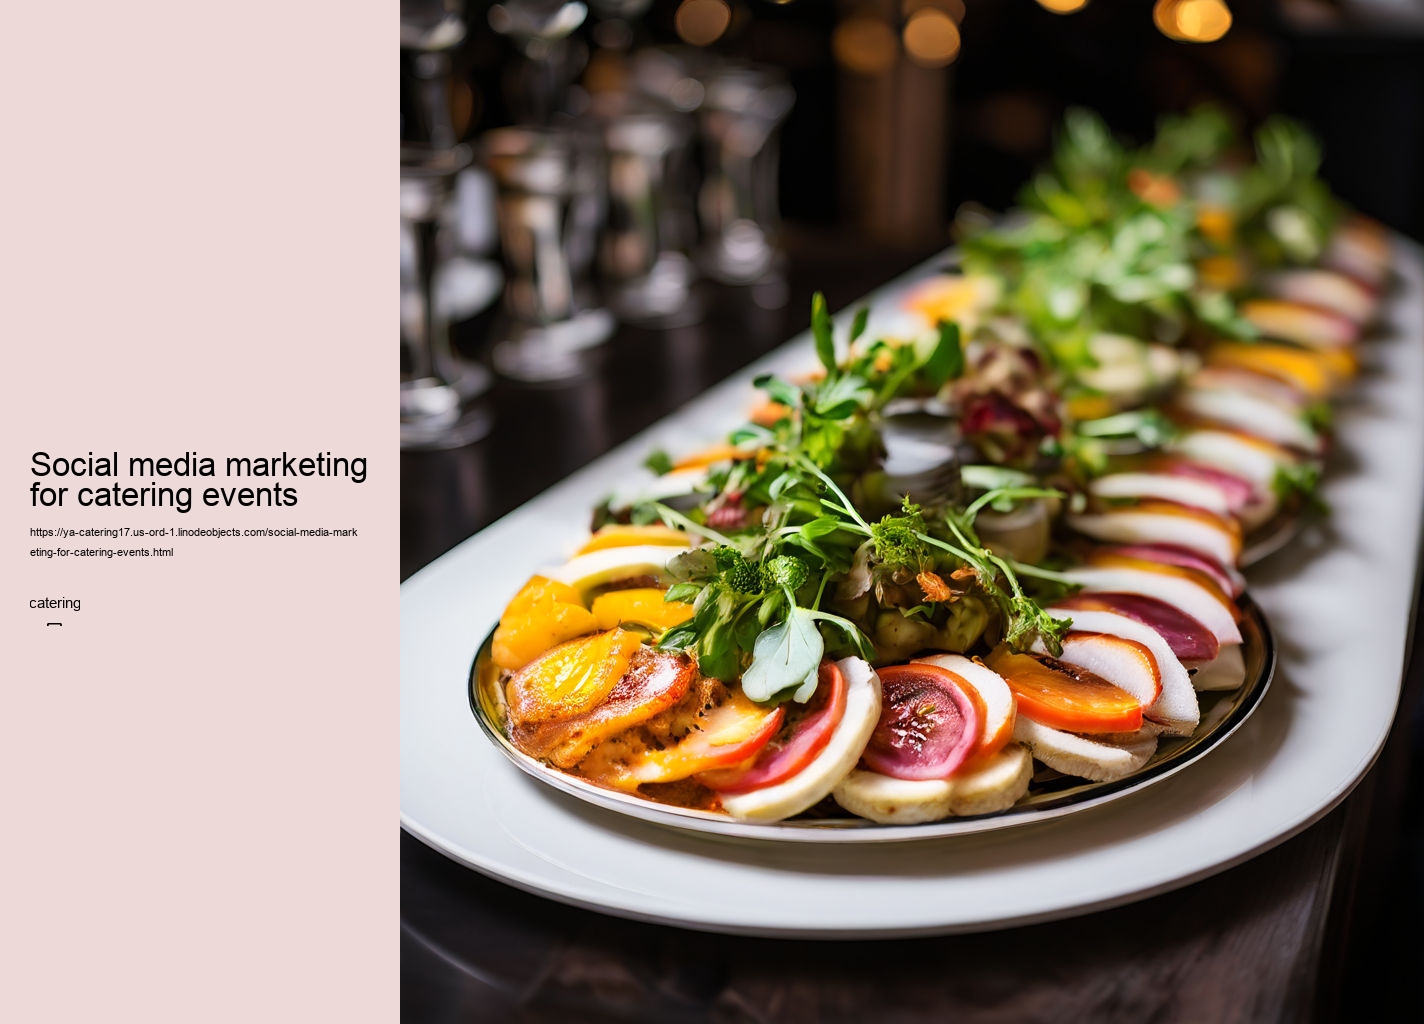 Social media marketing for catering events